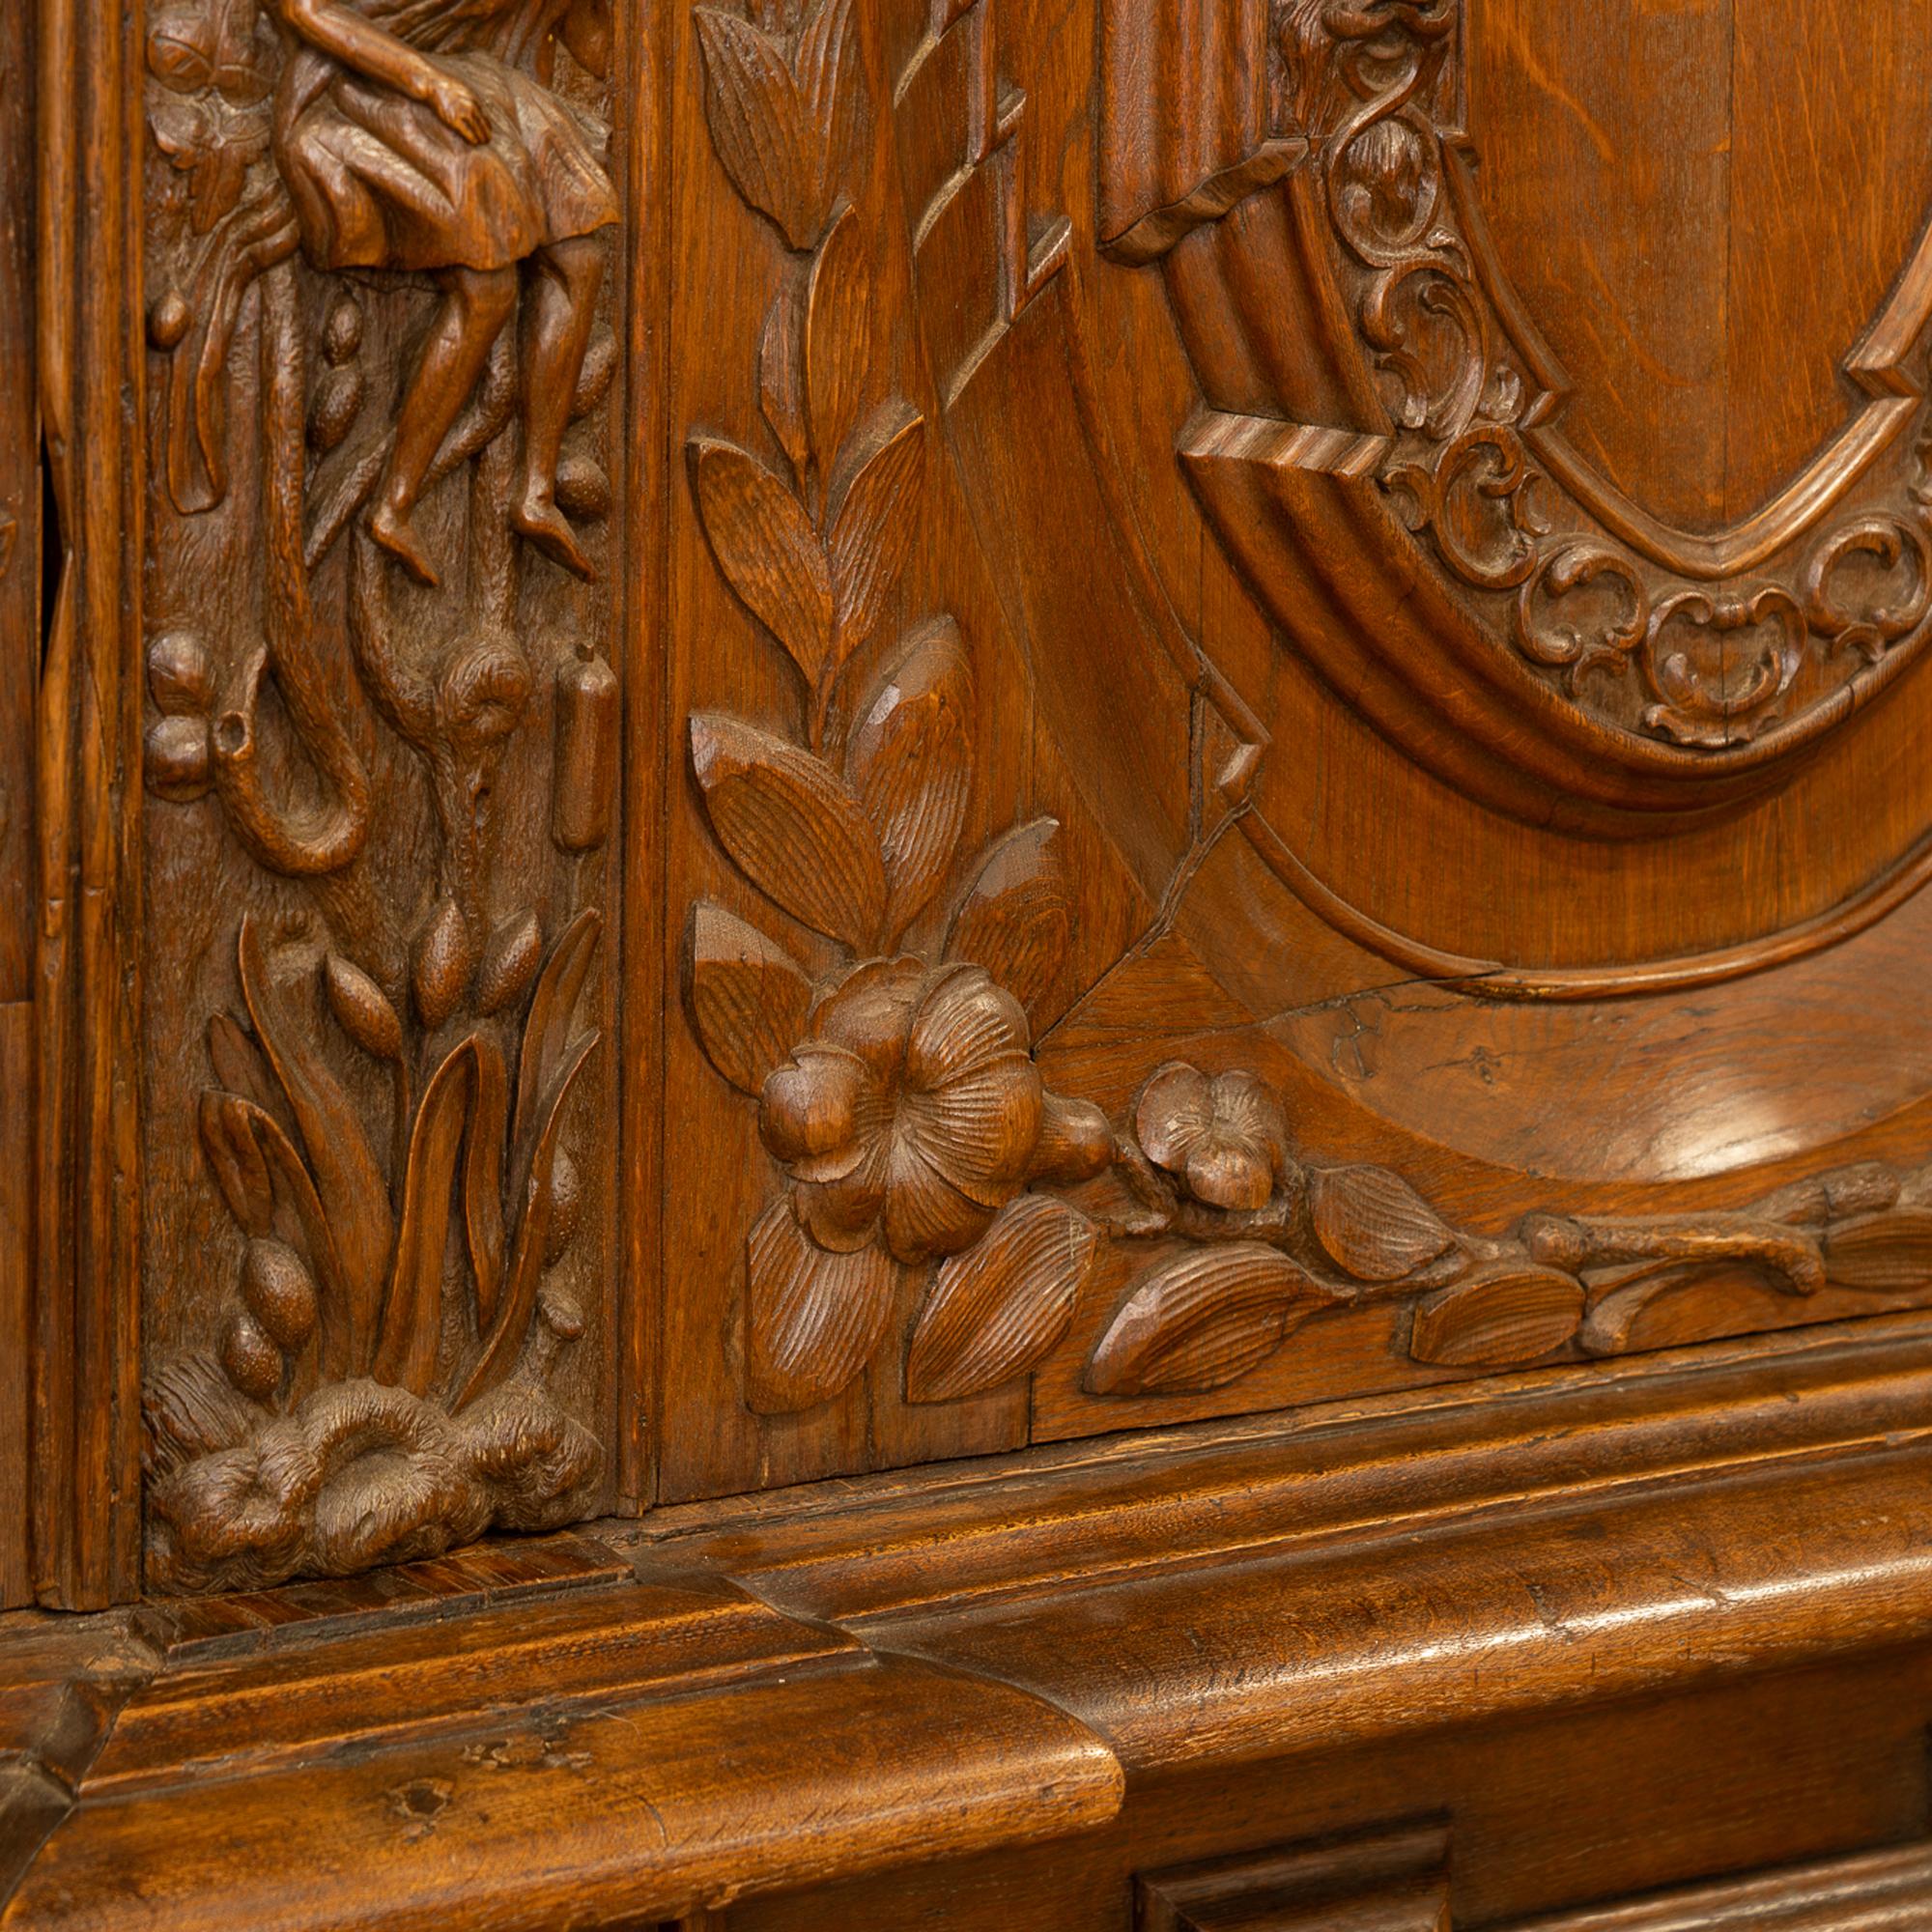 Large Heavily Carved Oak Armoire With Wrangel Family Crest, Sweden circa 1740-80 For Sale 9